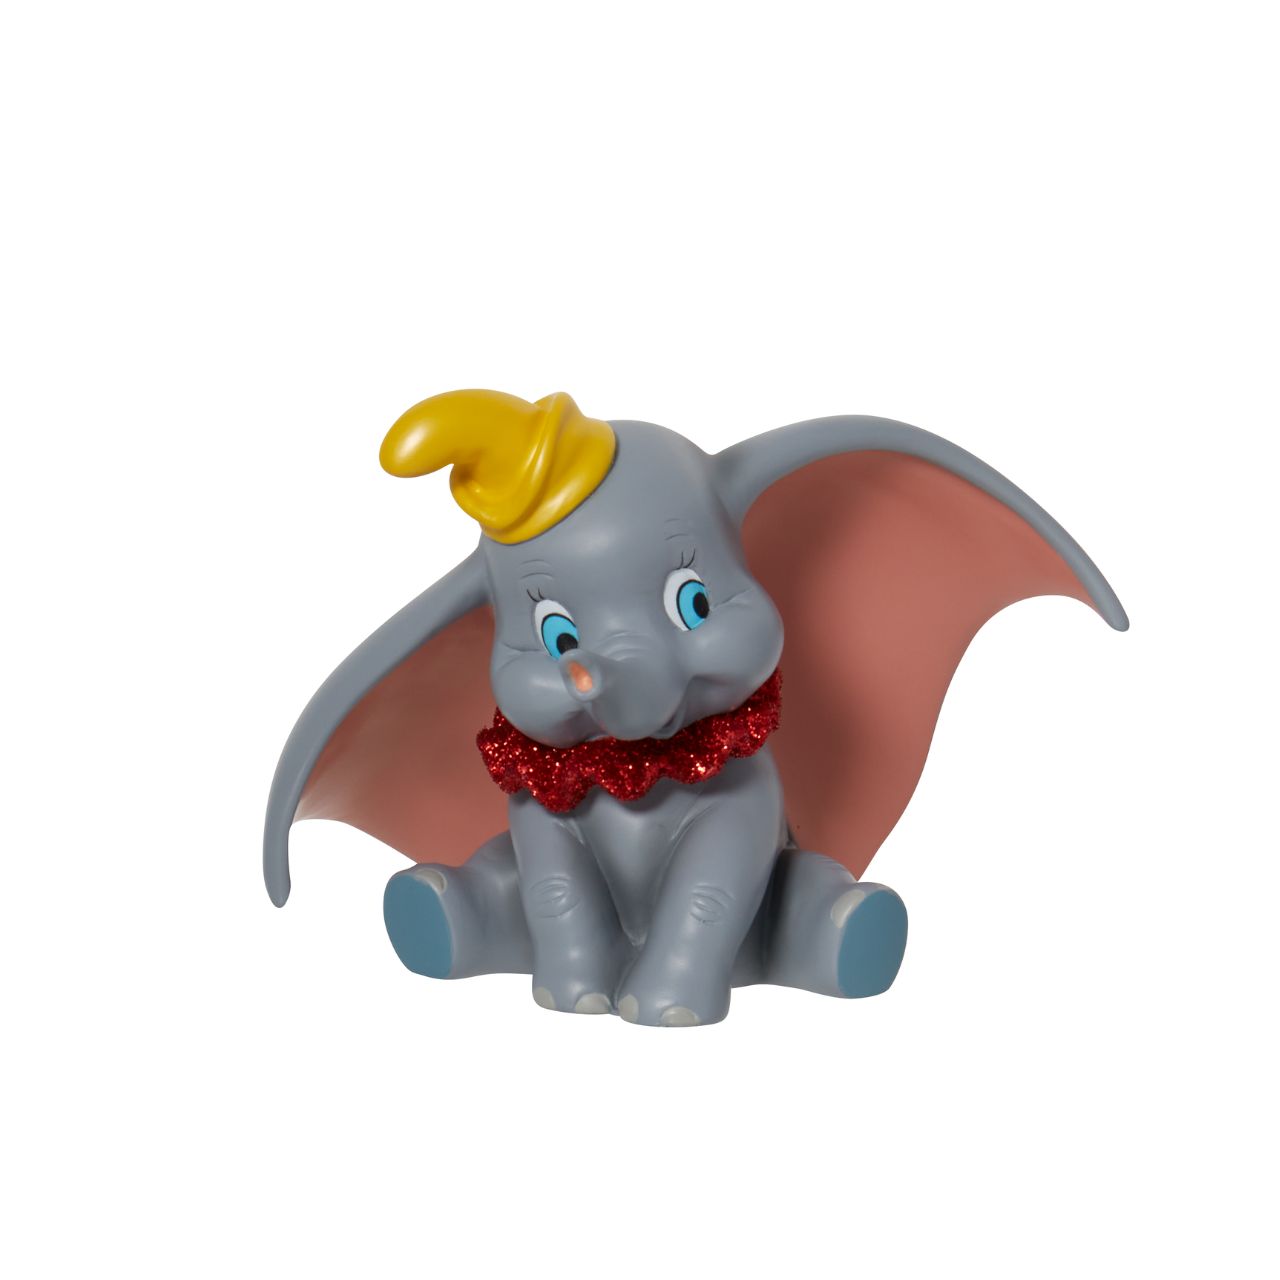 Everyone's favourite flying elephant looks circus-ready in this adorable pose by Disney Showcase. This realistic figurine has a beautiful finish complete with red glitter. This is a great addition to any nursery and is not a toy or children's product.